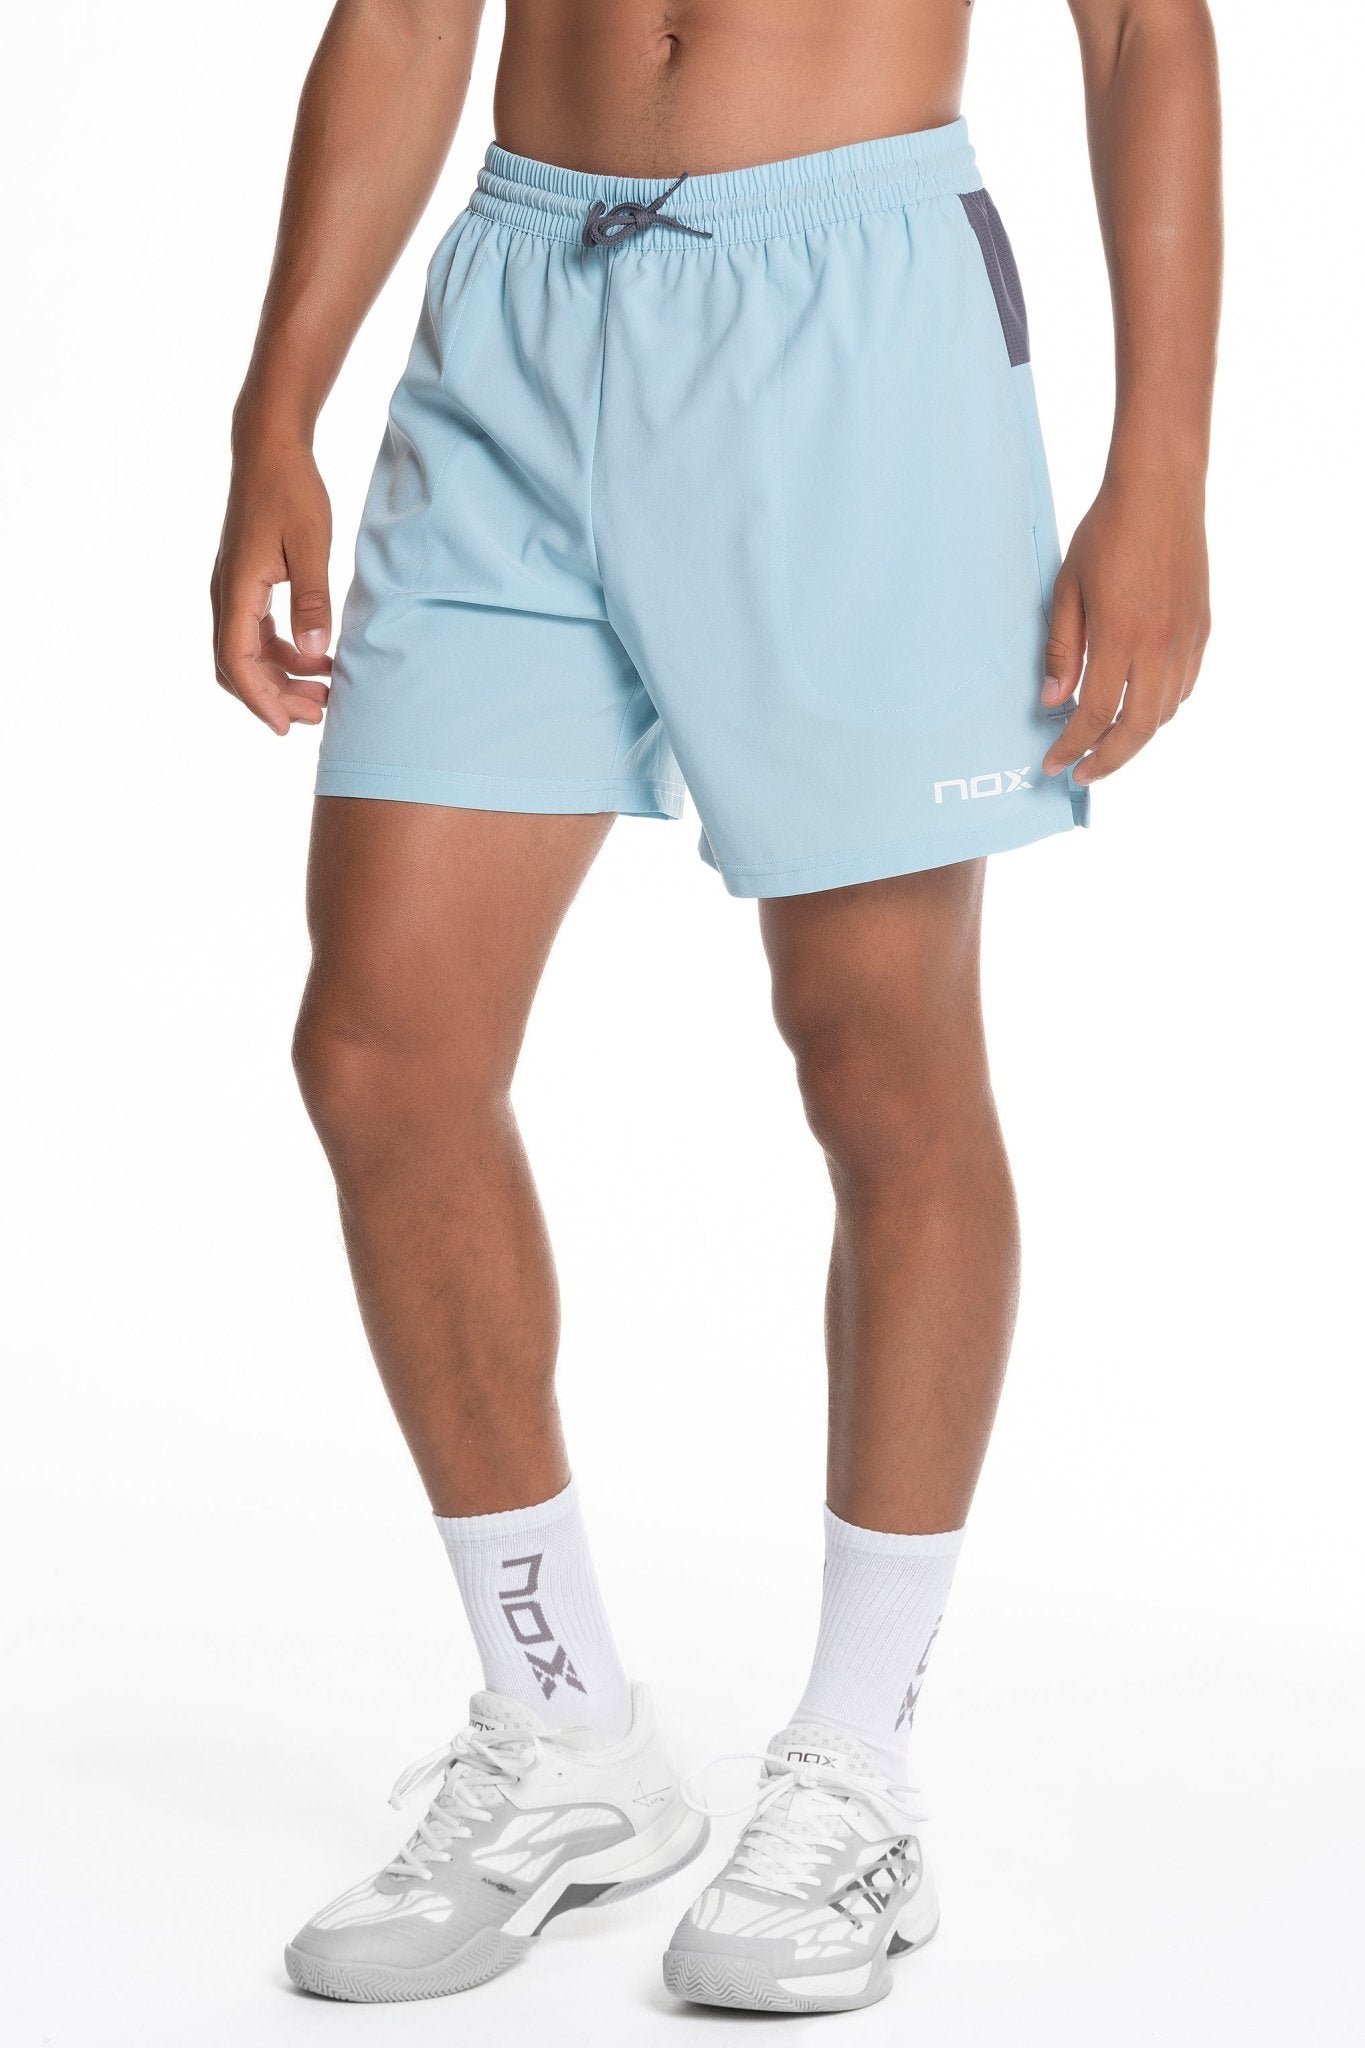 Short Padel Hombre Picky Carbono Tap